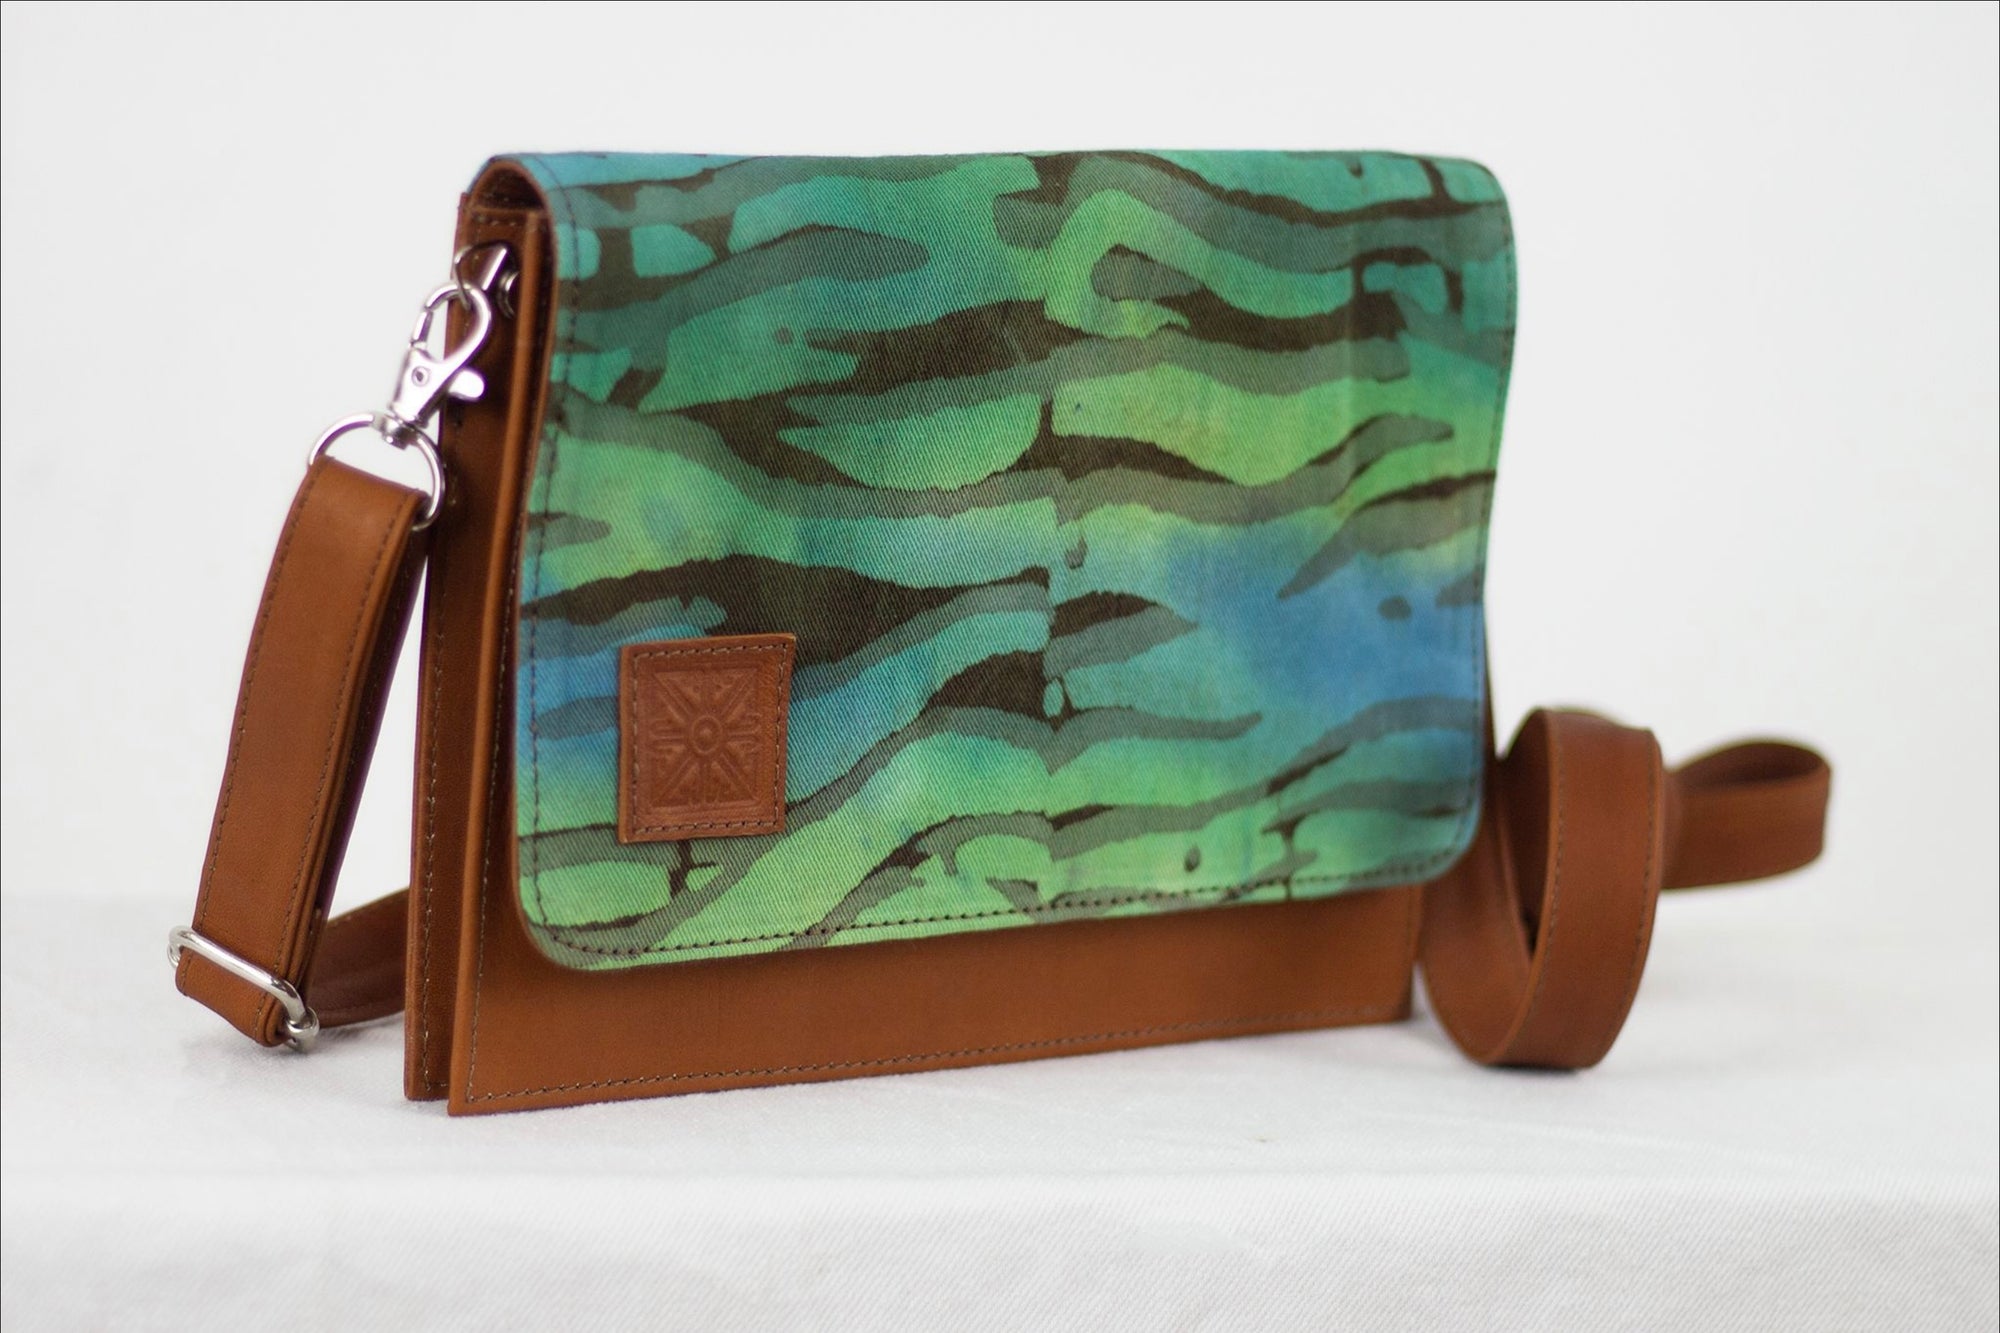 Hand painted, leather trimmed cross body tote with the green and blue “Boo Verdi Blue” pattern #1